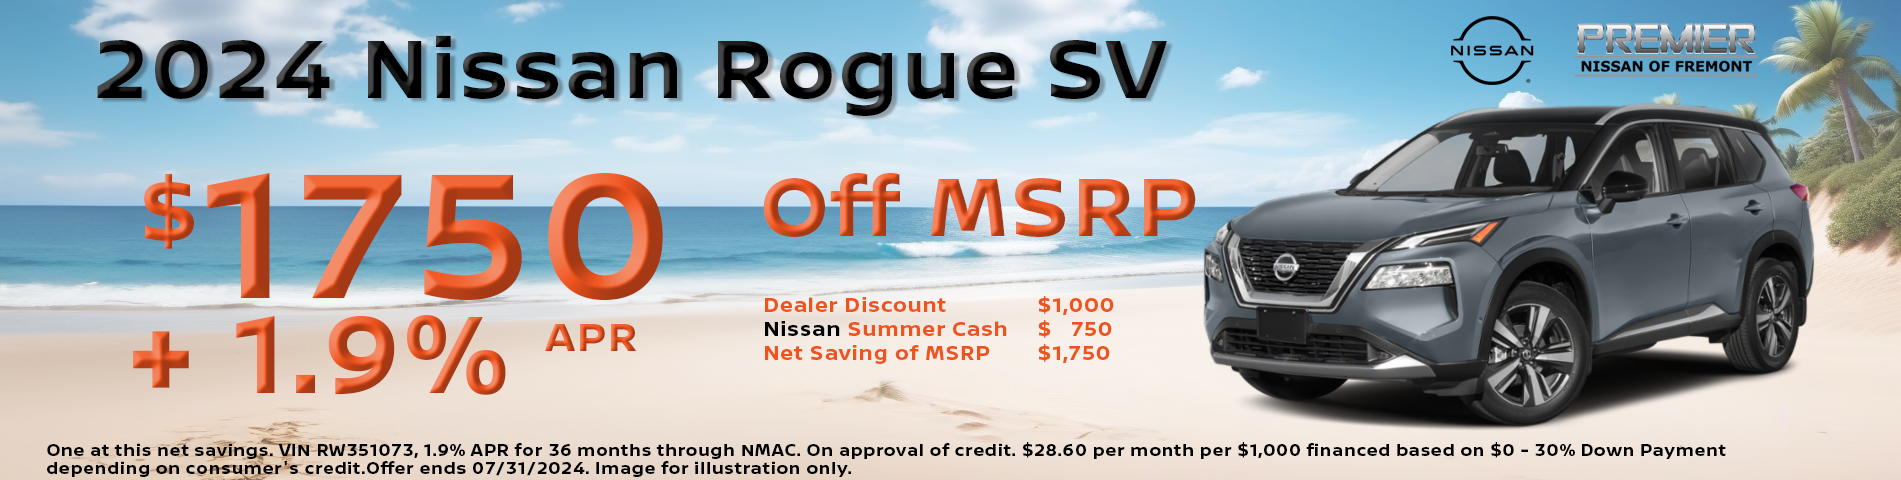 $1750 Off MSRP + 1.9% APR on 2024 Nissan Rogue